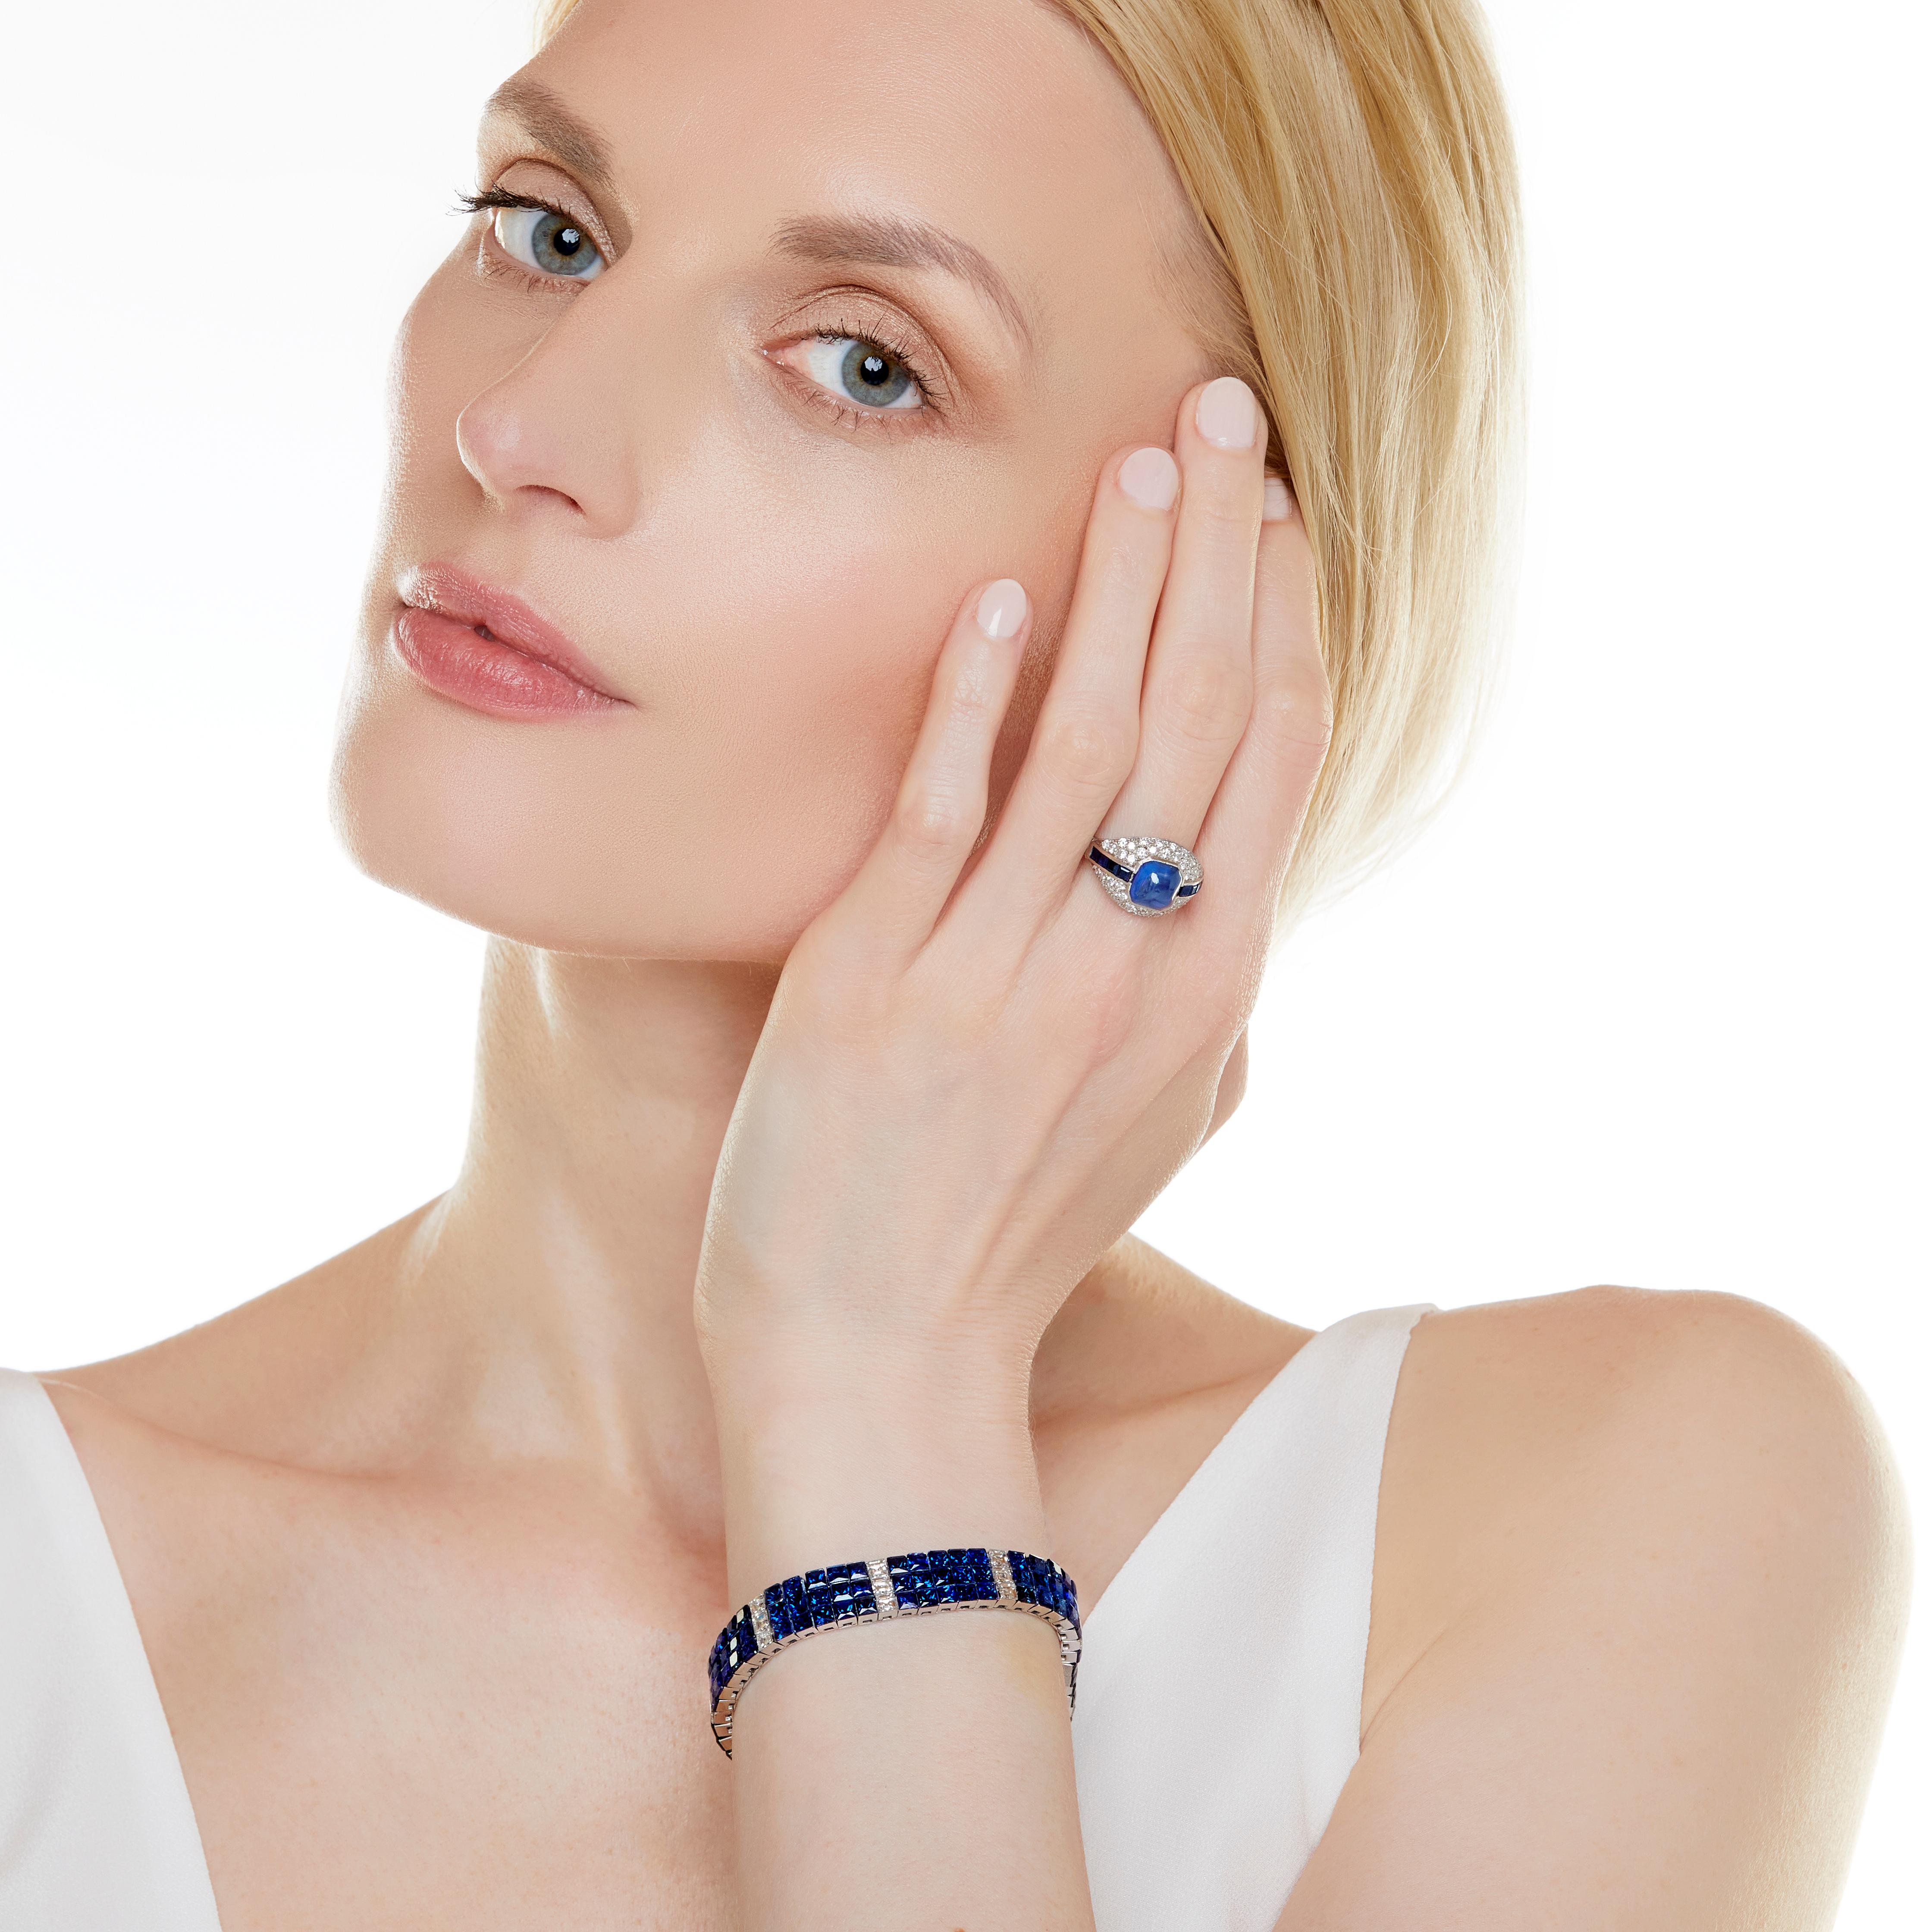 This sophisticated invisibly set sapphire and diamond bracelet is as flexible and easy to wear as a ribbon tied around your wrist. Set in platinum, the square cut sapphires are set in panels of fifteen stones interspersed with three French-cut